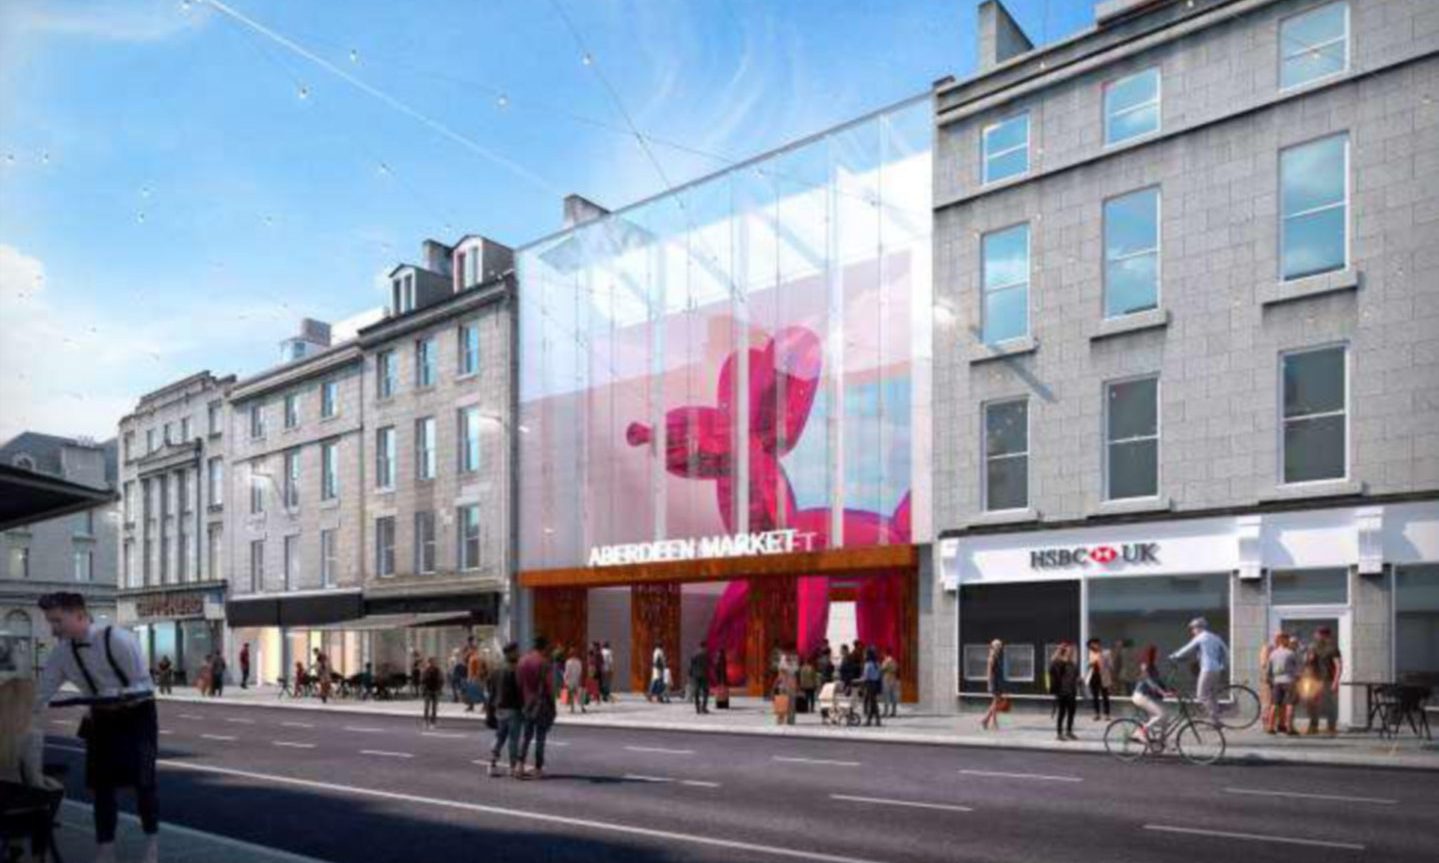 Just across the road from Marks and Spencer, the former BHS site is being used for the multi-million-pound Aberdeen market development. Image: Halliday Fraser Munro/Aberdeen City Council